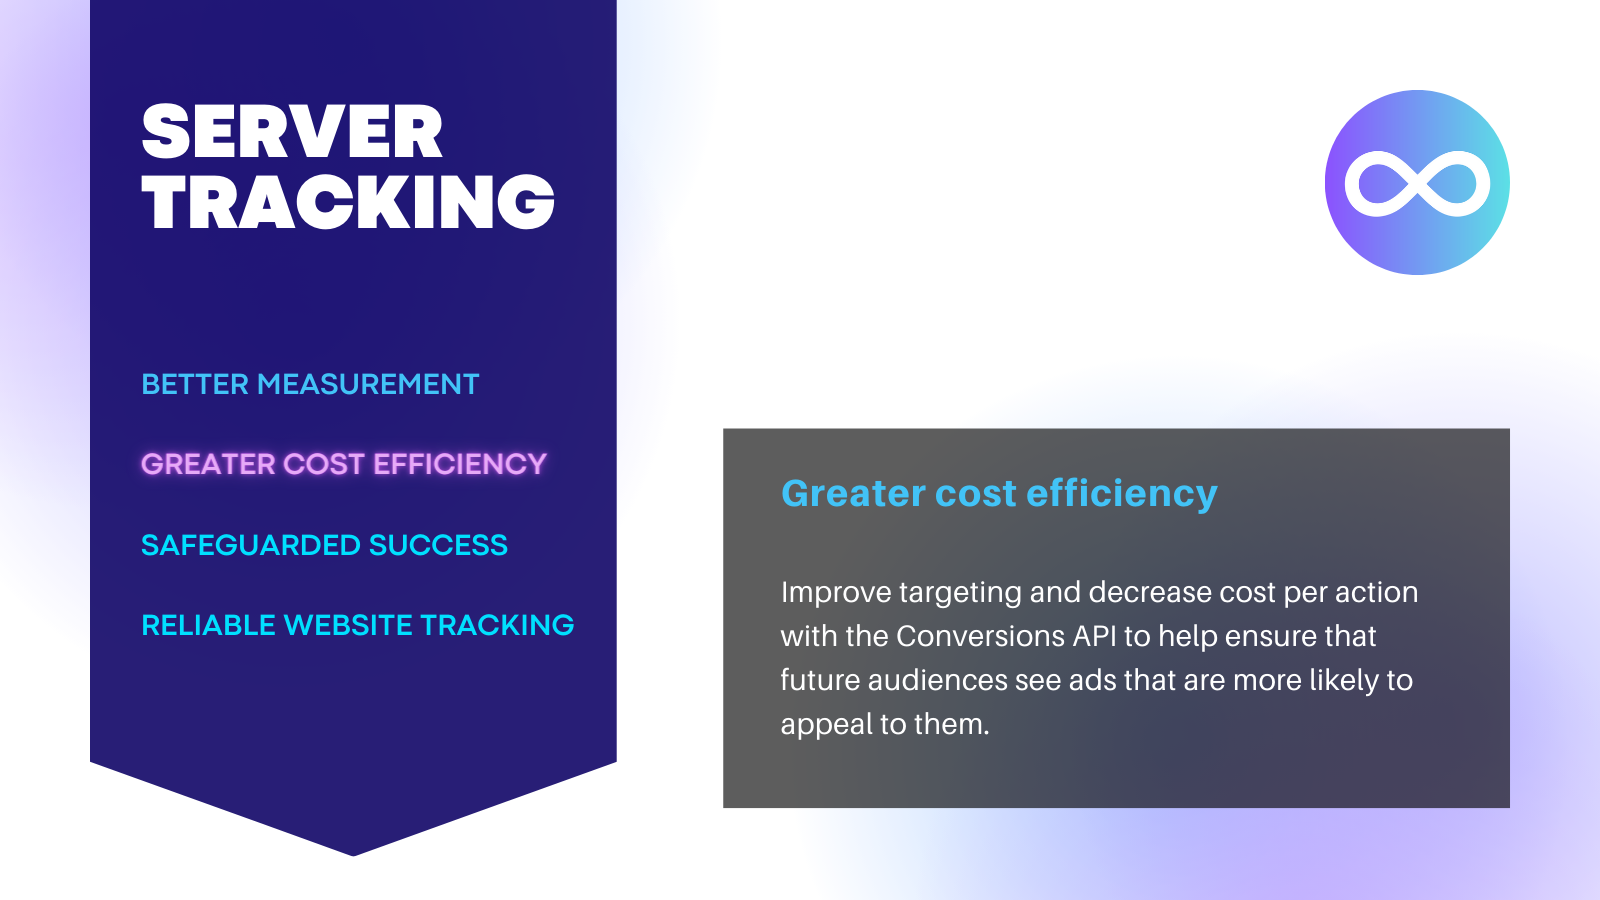 Greater cost efficiency